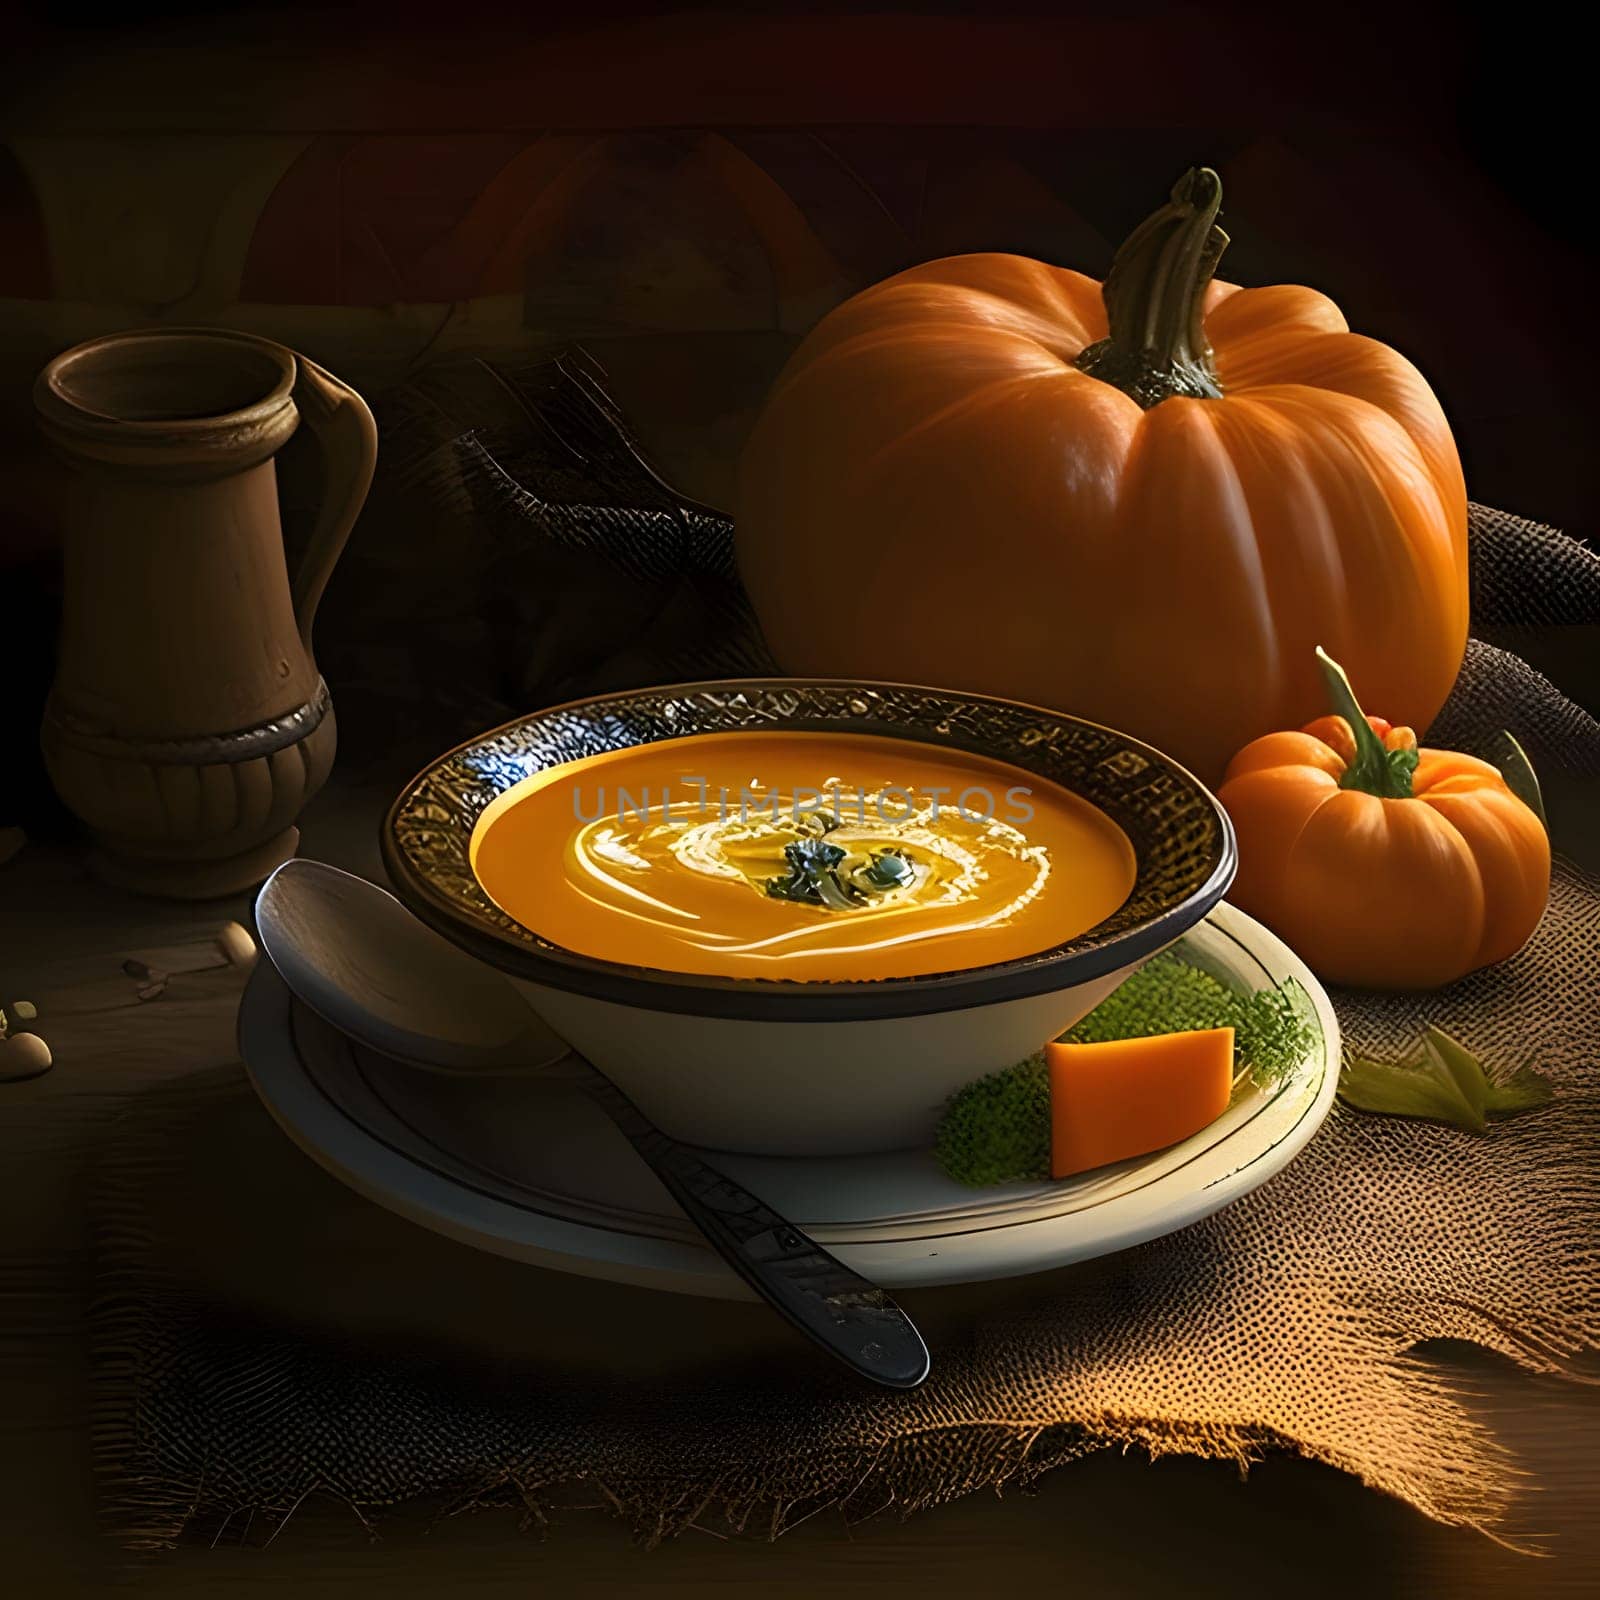 Pumpkin soup in a bowl, with pumpkins and fabric all around. Pumpkin as a dish of thanksgiving for the harvest. An atmosphere of joy and celebration.